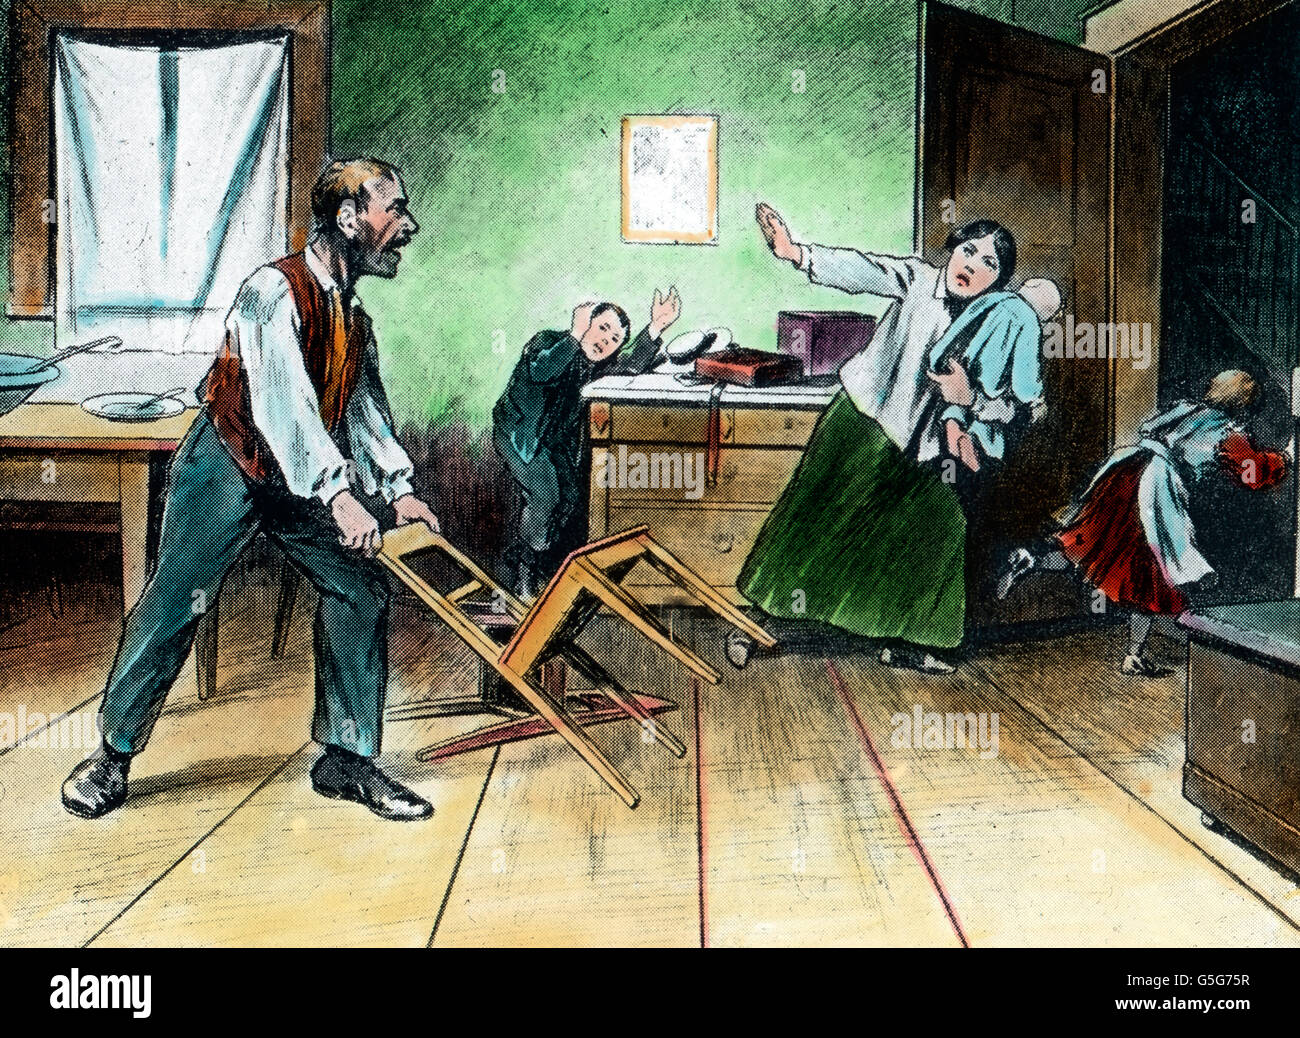 Säuferwahn. Violent drunkard.  violence, family, home, running, children, man, woman, wife, drunk, chair, beating, rampage, rampaging, illustration, alcohol, drug, history, historical, 1910s, 1920s, 20th century, archive, Carl Simon, hand coloured glass slide Stock Photo